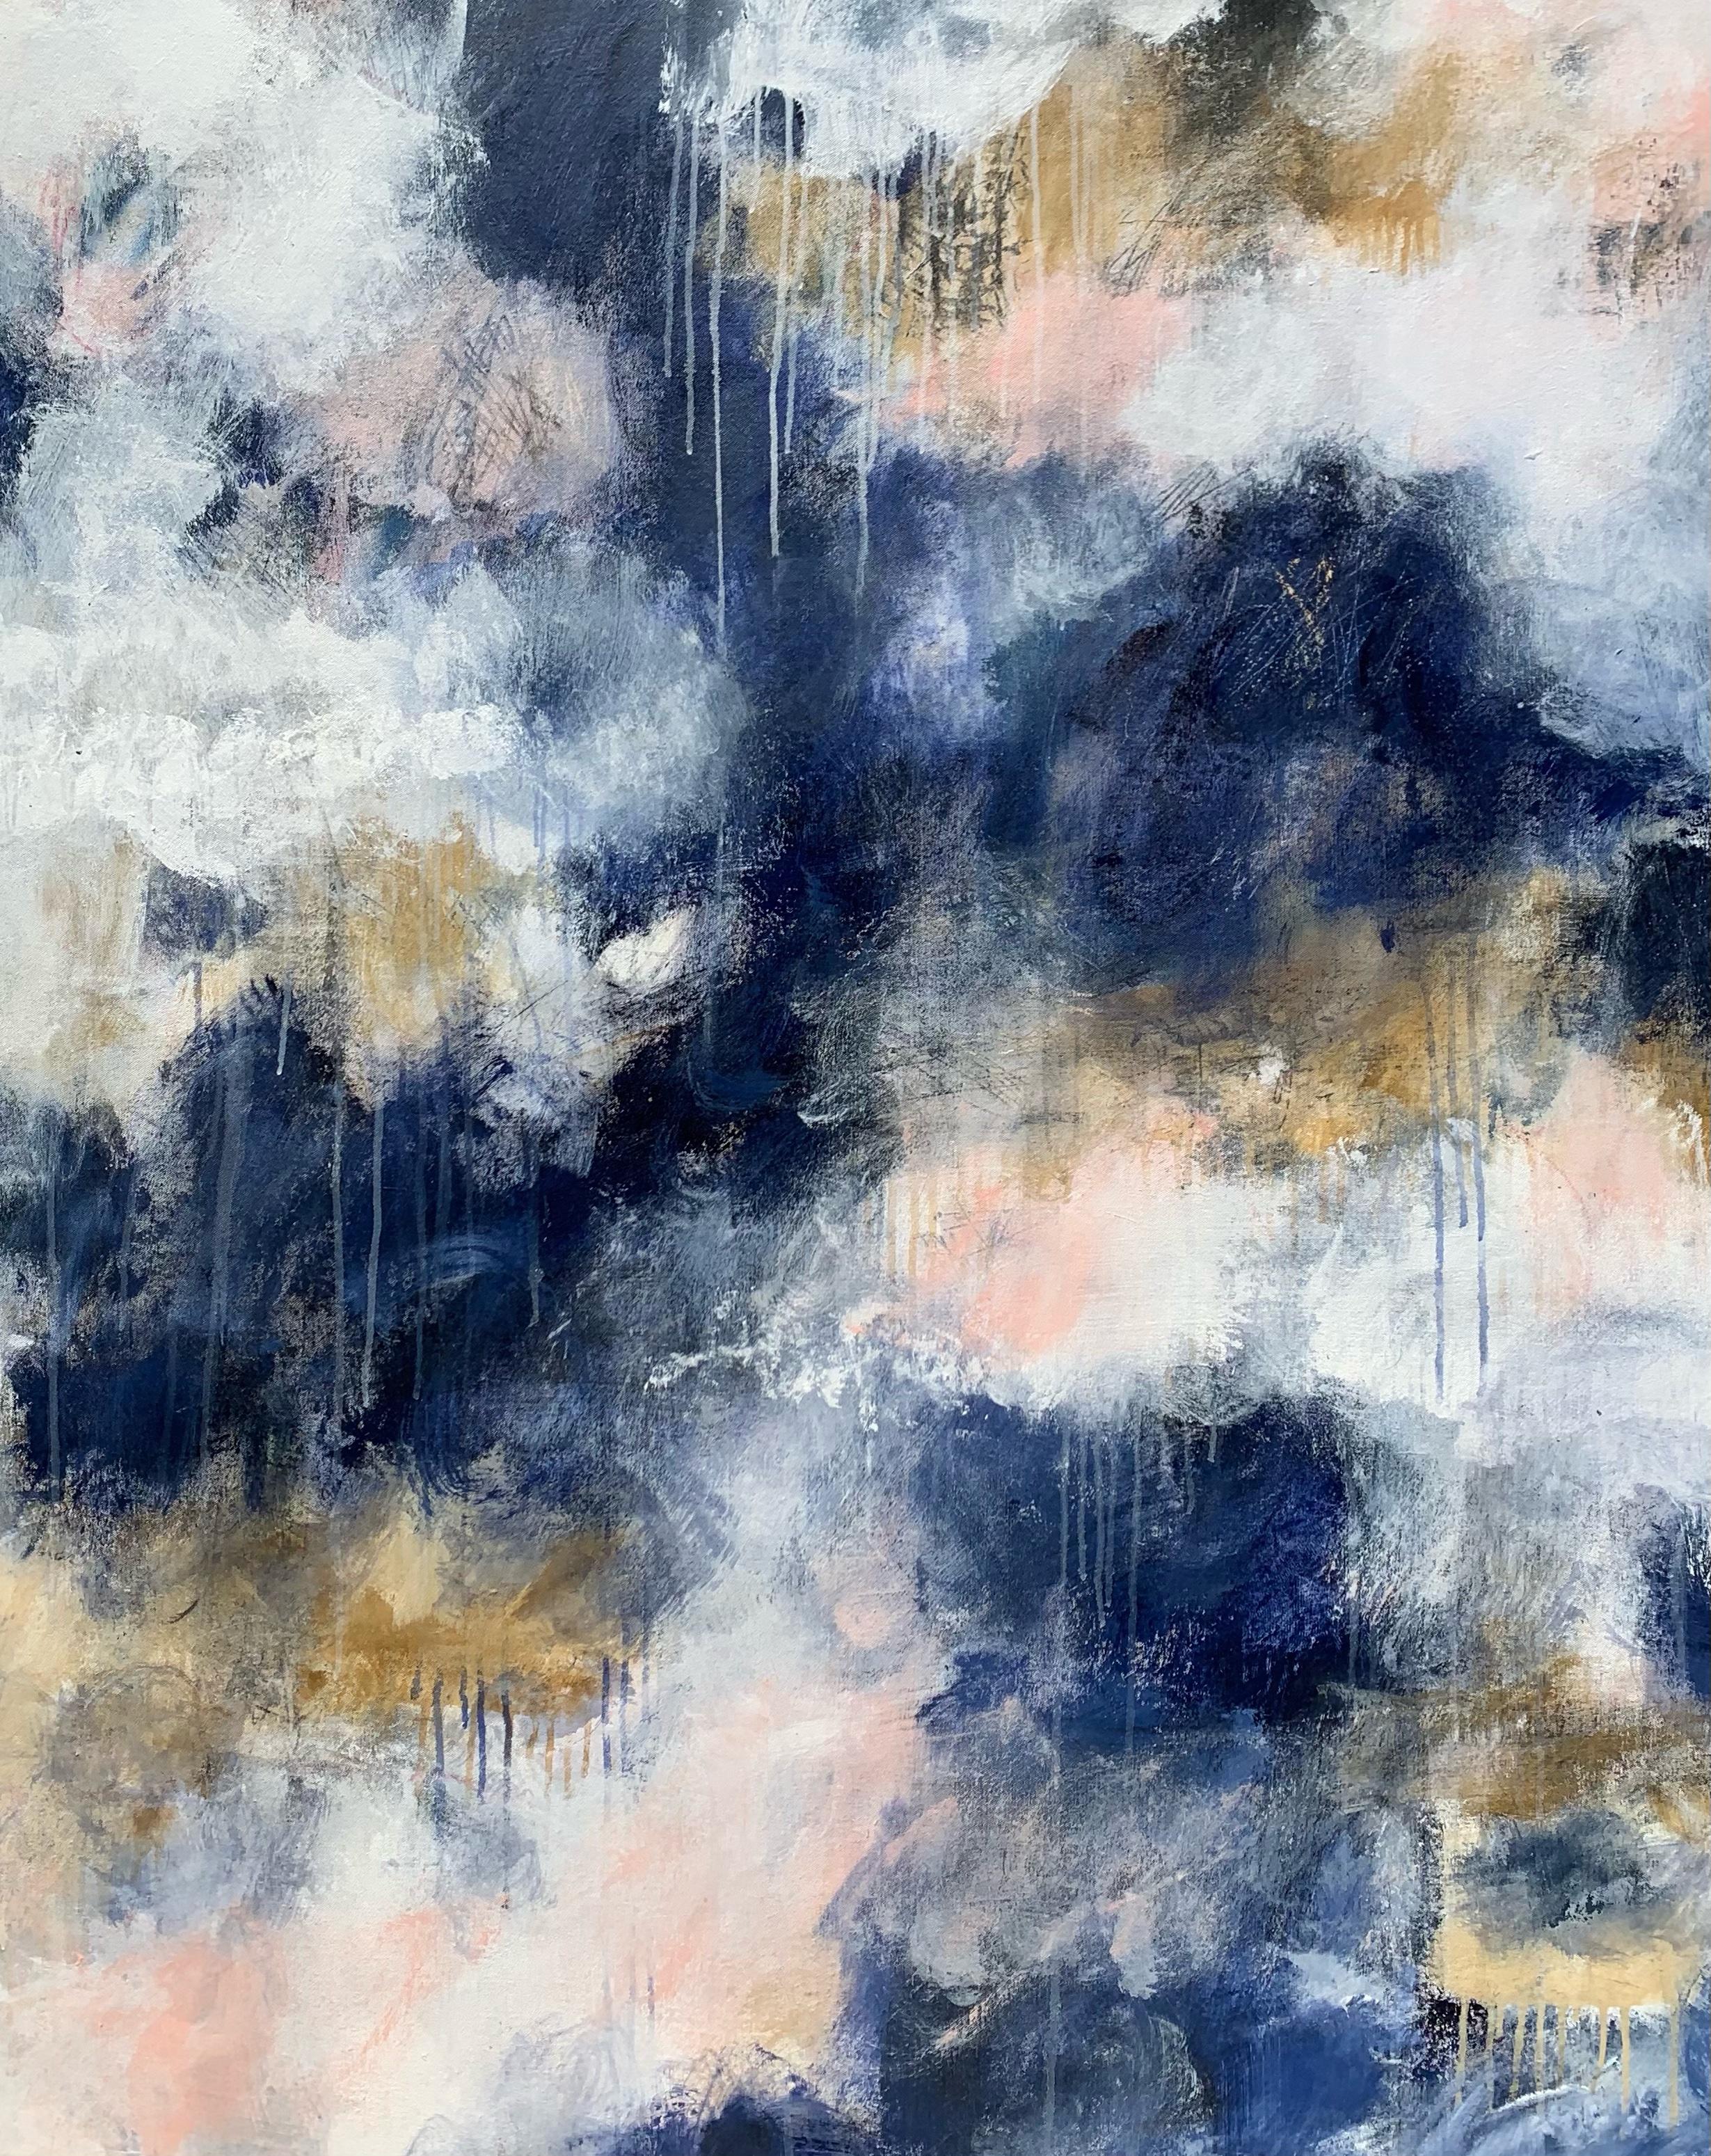 Laurie King is an abstract mixed media artist. This piece features tones of white, dark blue, tan, and pink. She conveys the unadorned beauty of nature, the transparency of light and the continuous shifting mysteries of atmosphere.

Laurie King